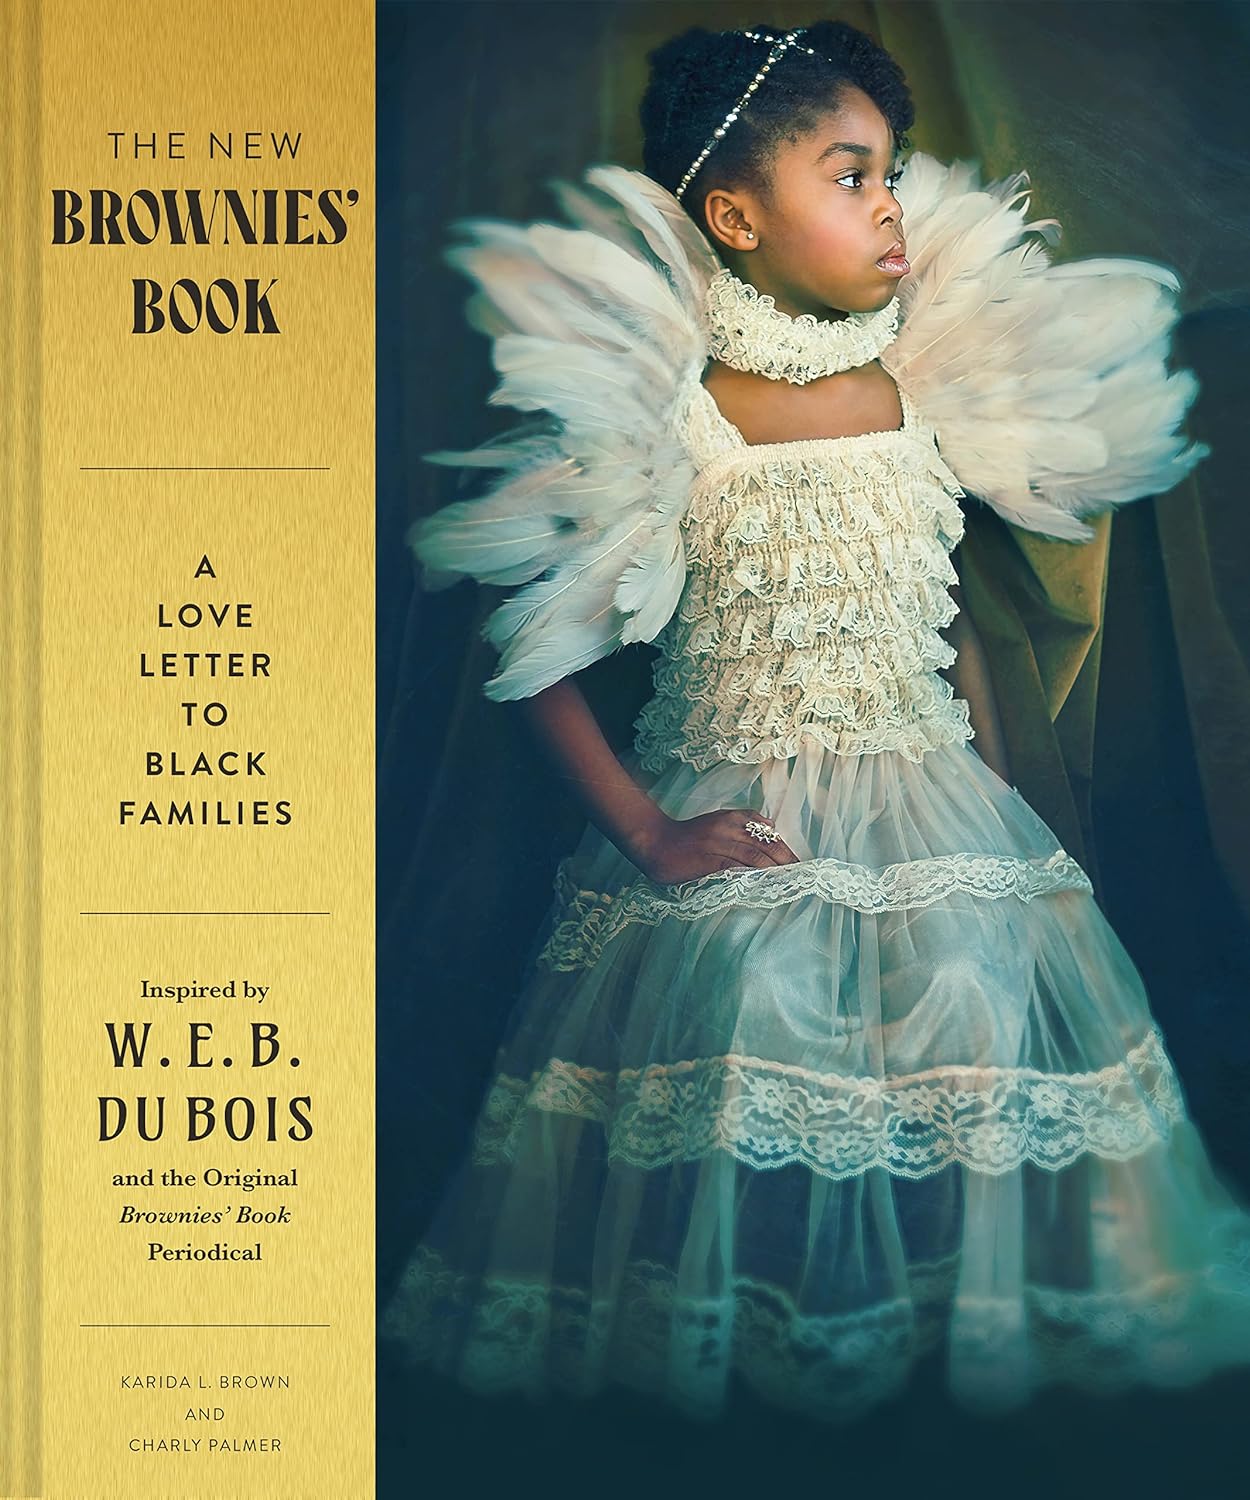 New Brownie Book: A Love Letter to Black Families